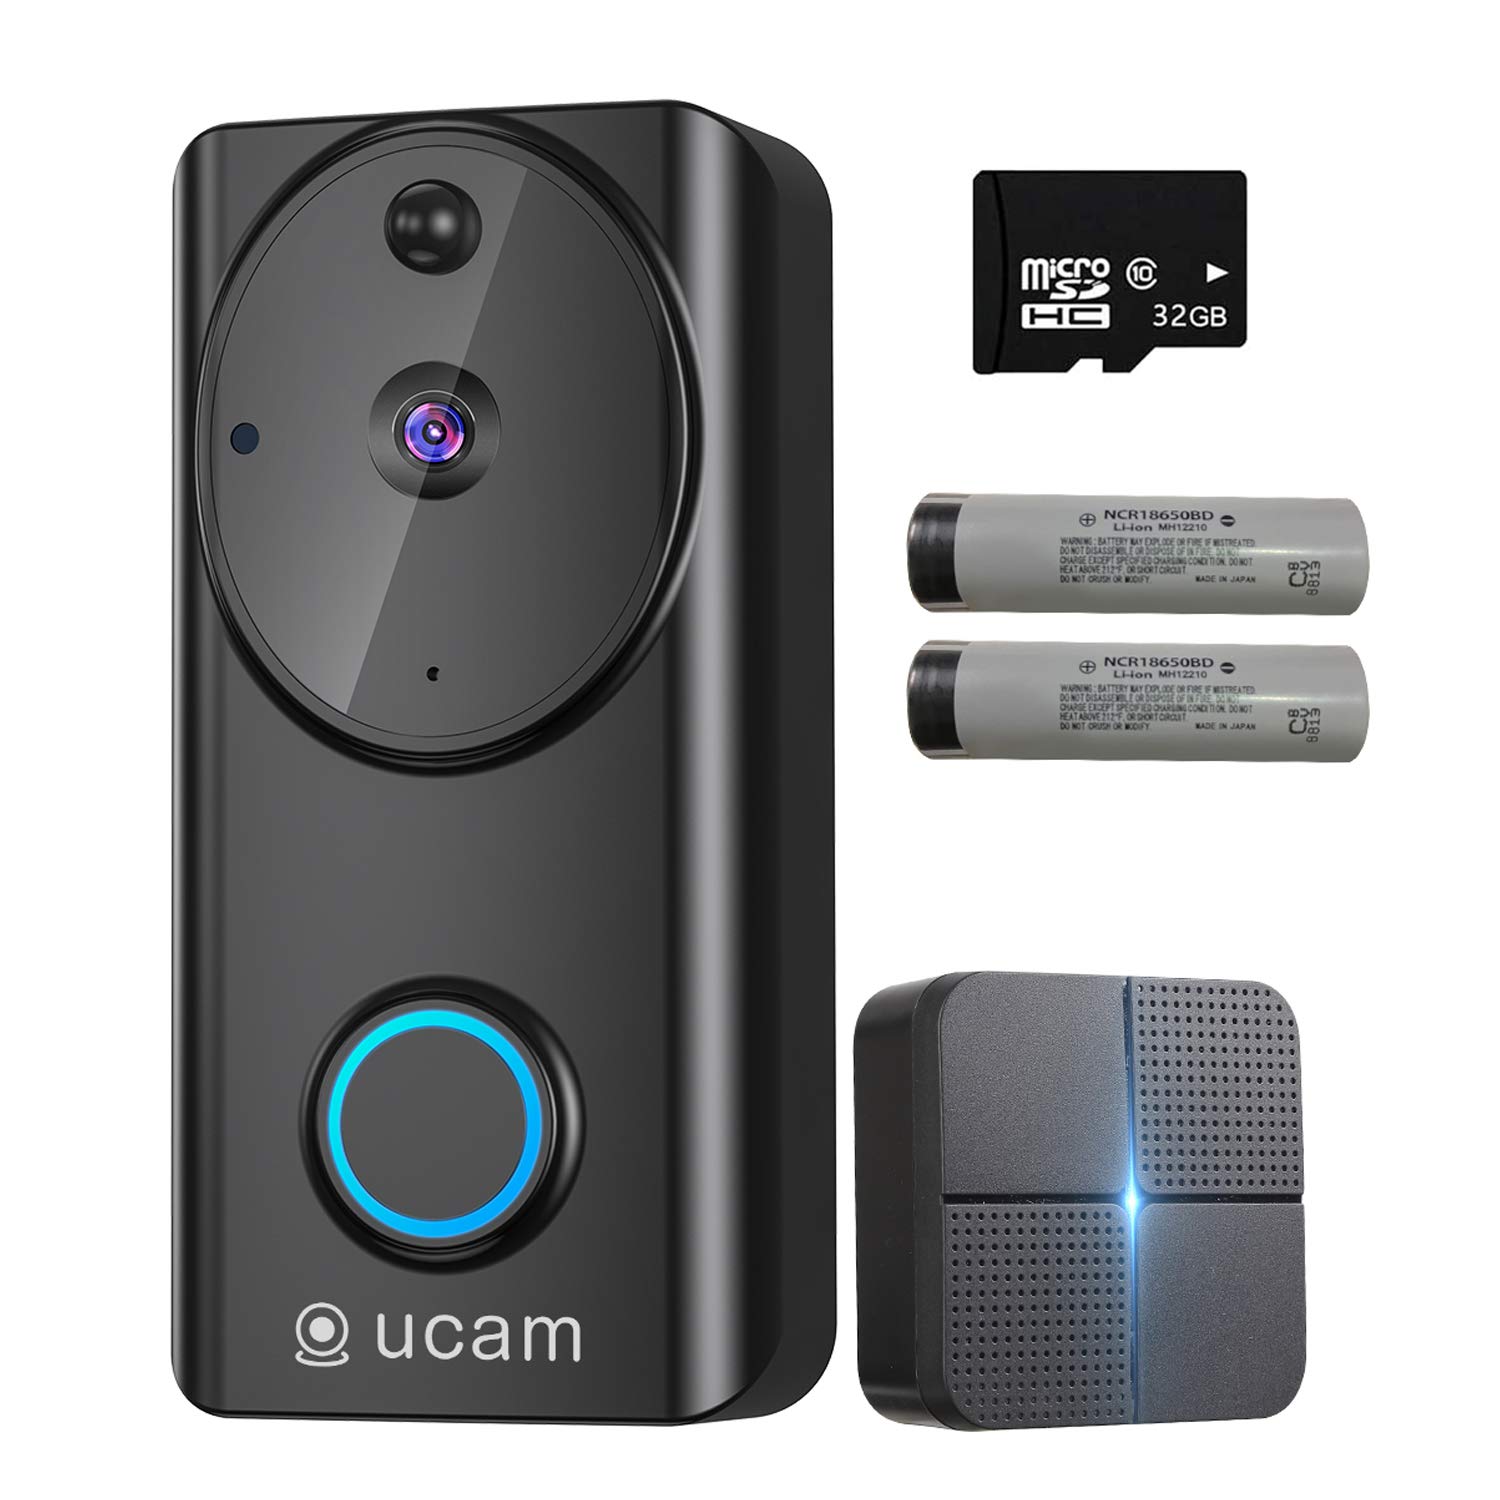 OUCAM Video Doorbell Wireless Wi-fi with Chime, Doorbell Camera with Motion Detector, 6400mAh Low Power Consumption, 2-Way Audio,1080P Night Vision...